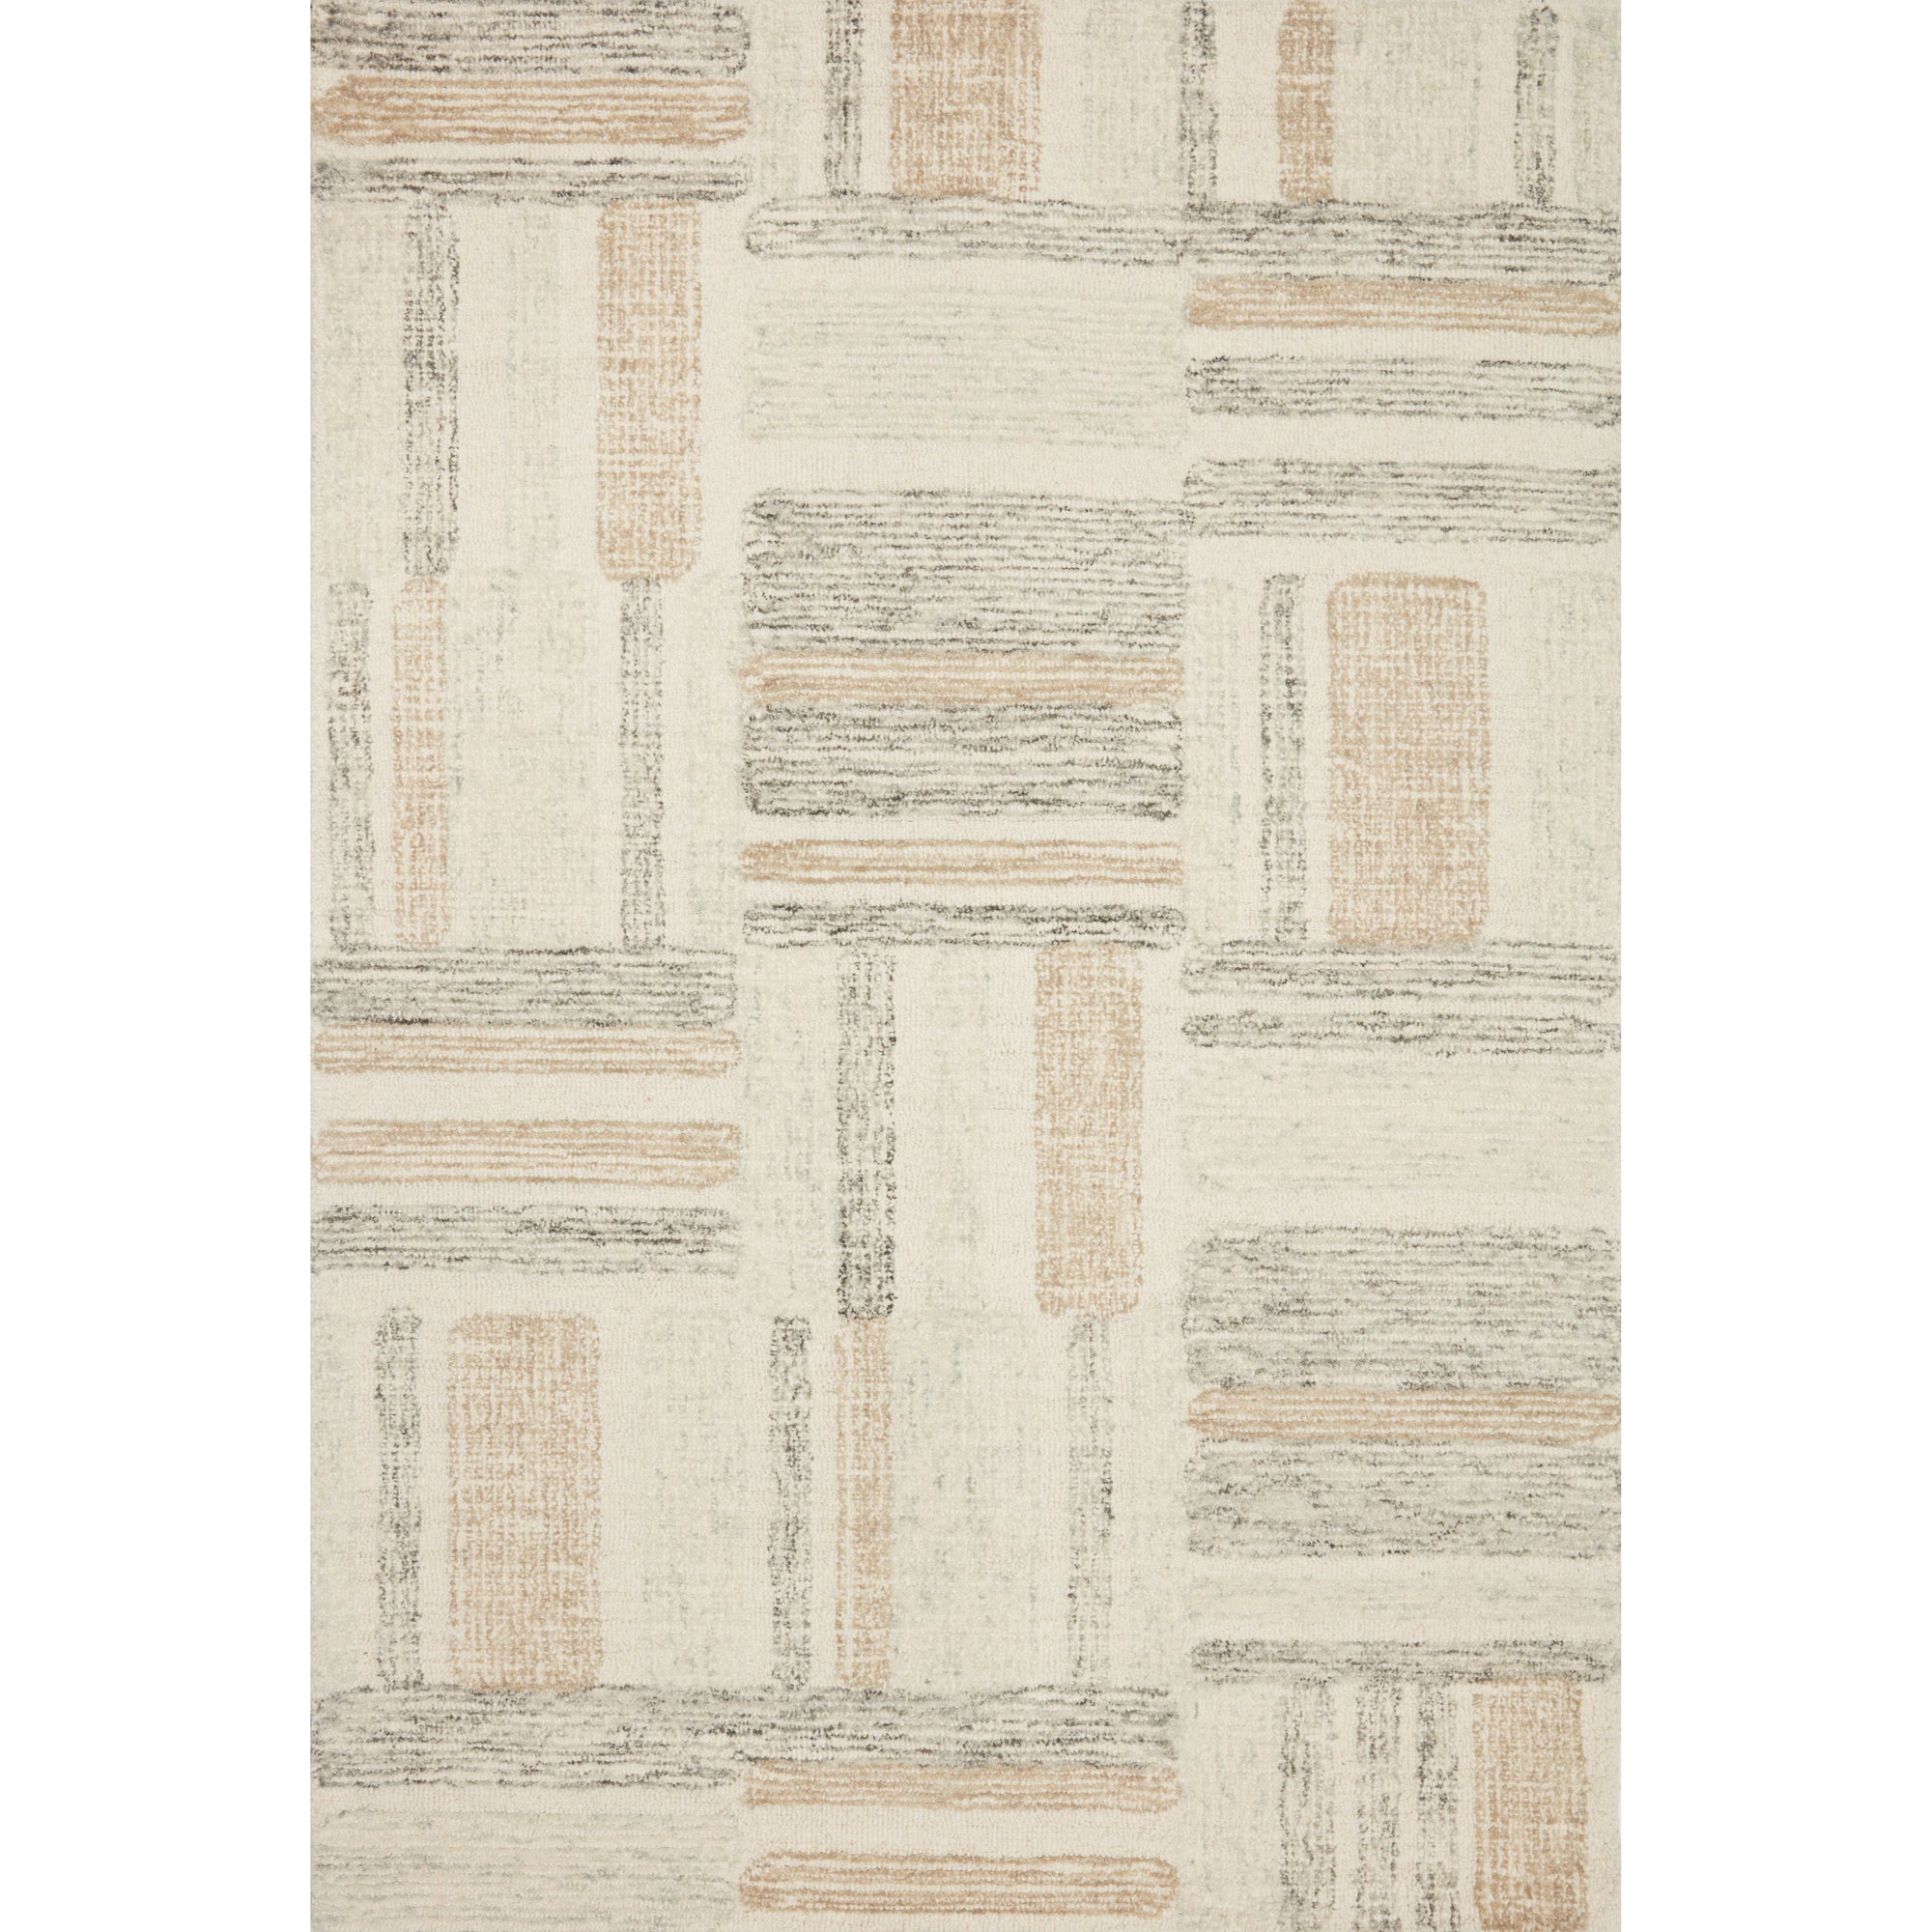 Rugs by Roo Loloi Milo Slate Olive Area Rug in size 18" x 18" Sample